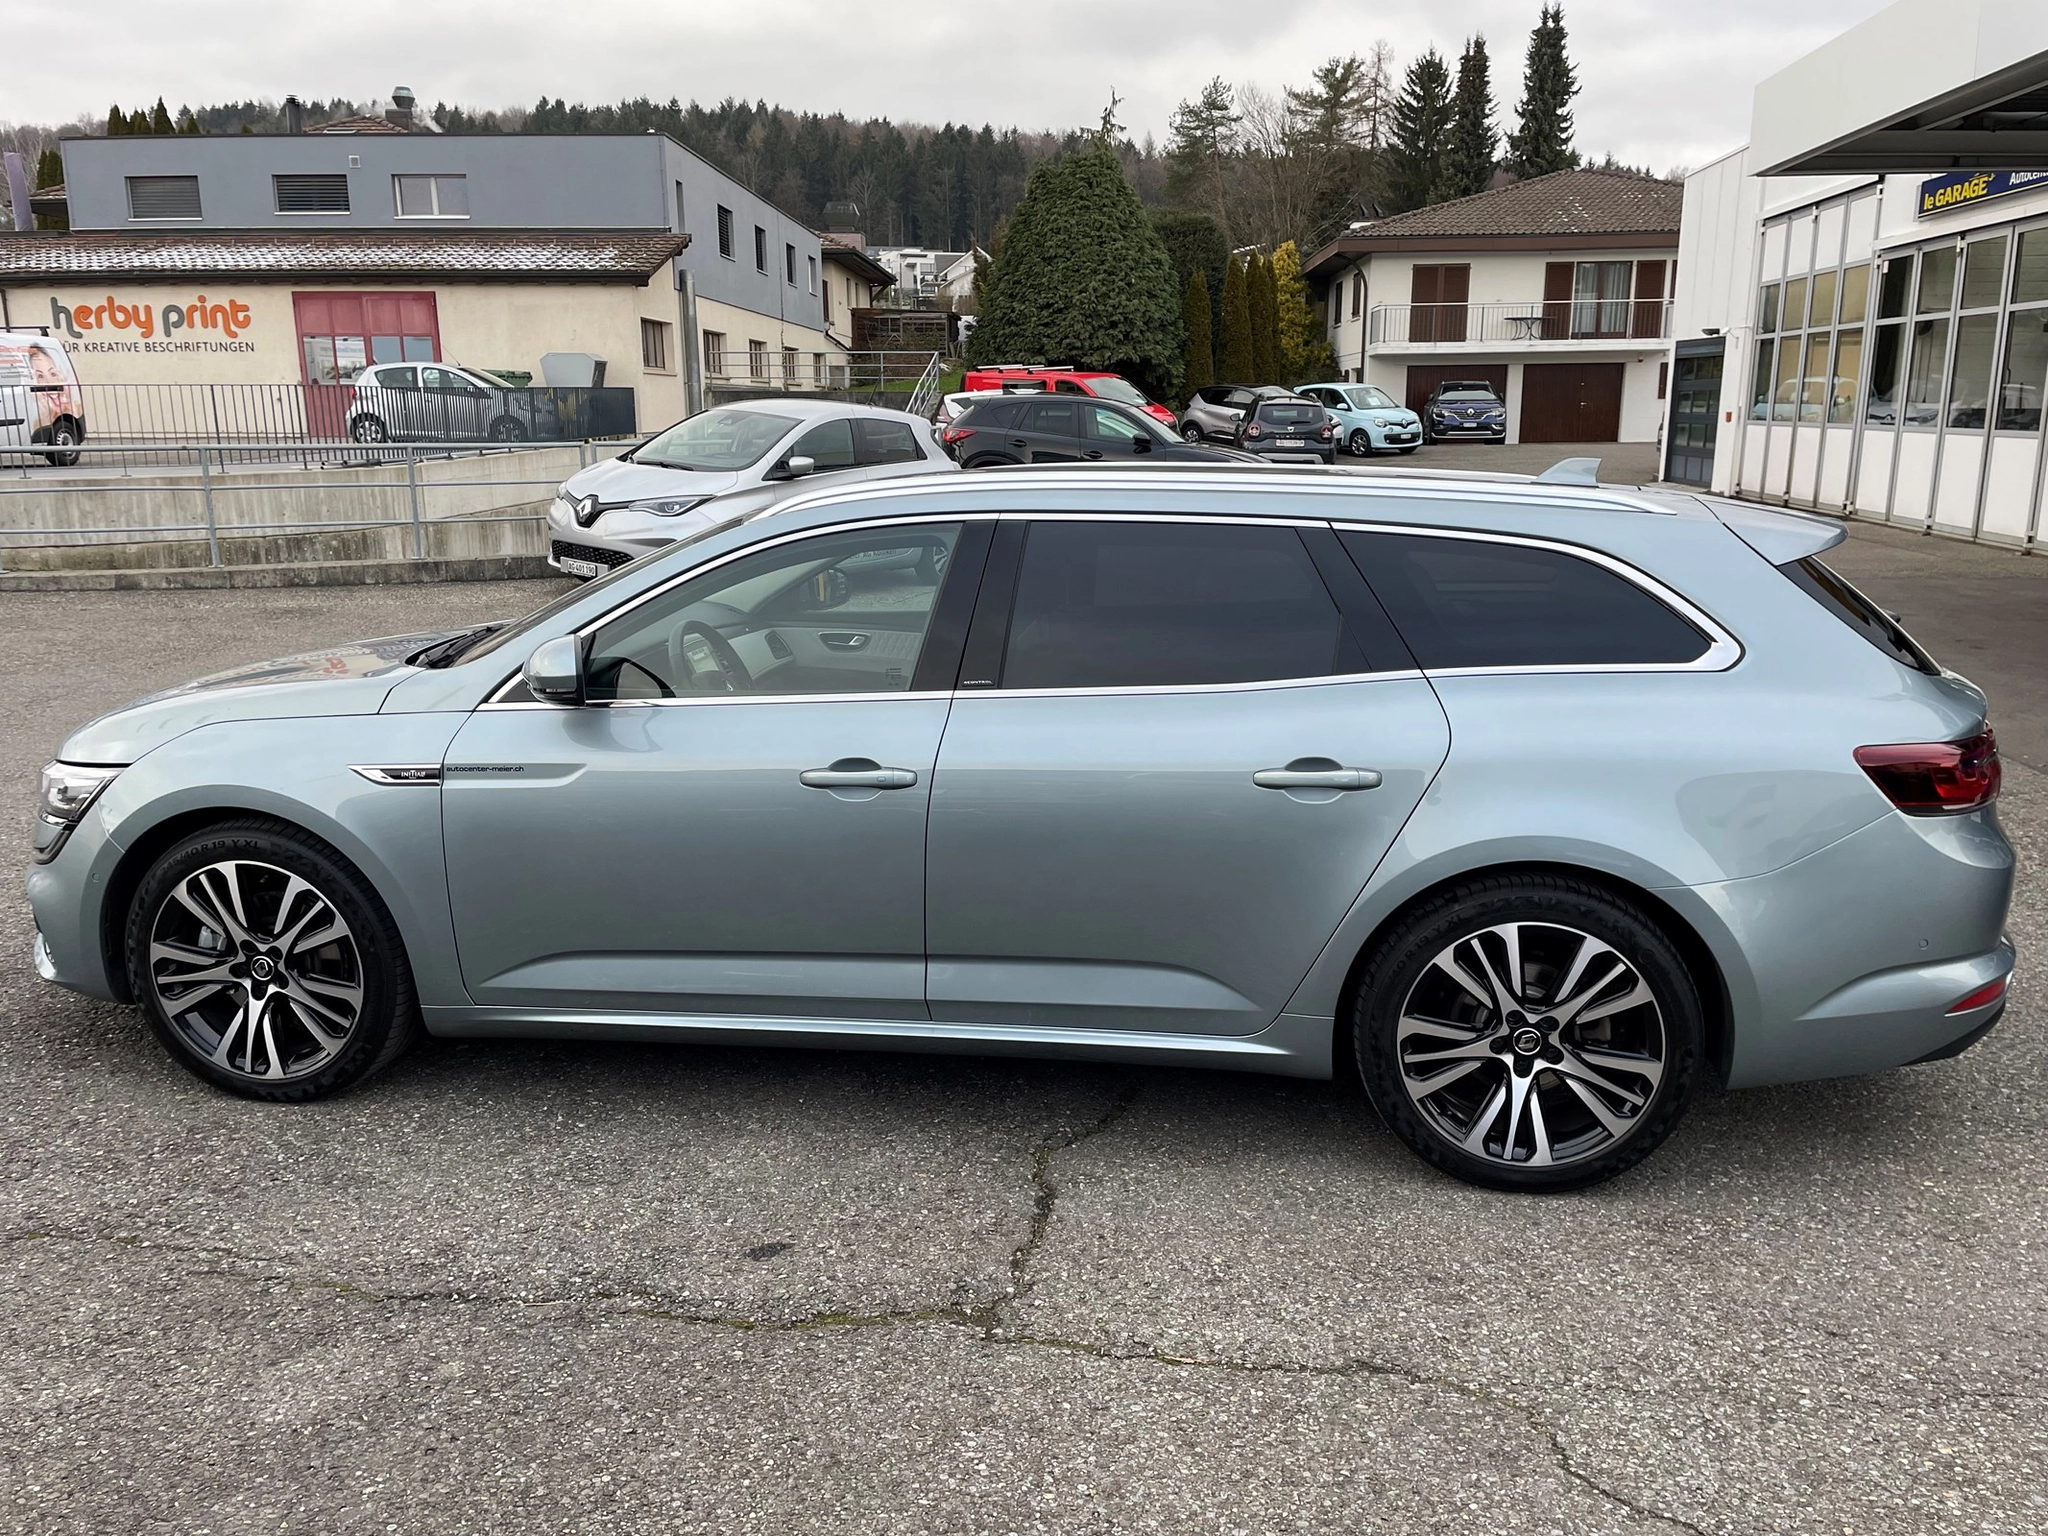 Used Renault Talisman Grandtour Leasing in Switzerland from CHF 189 